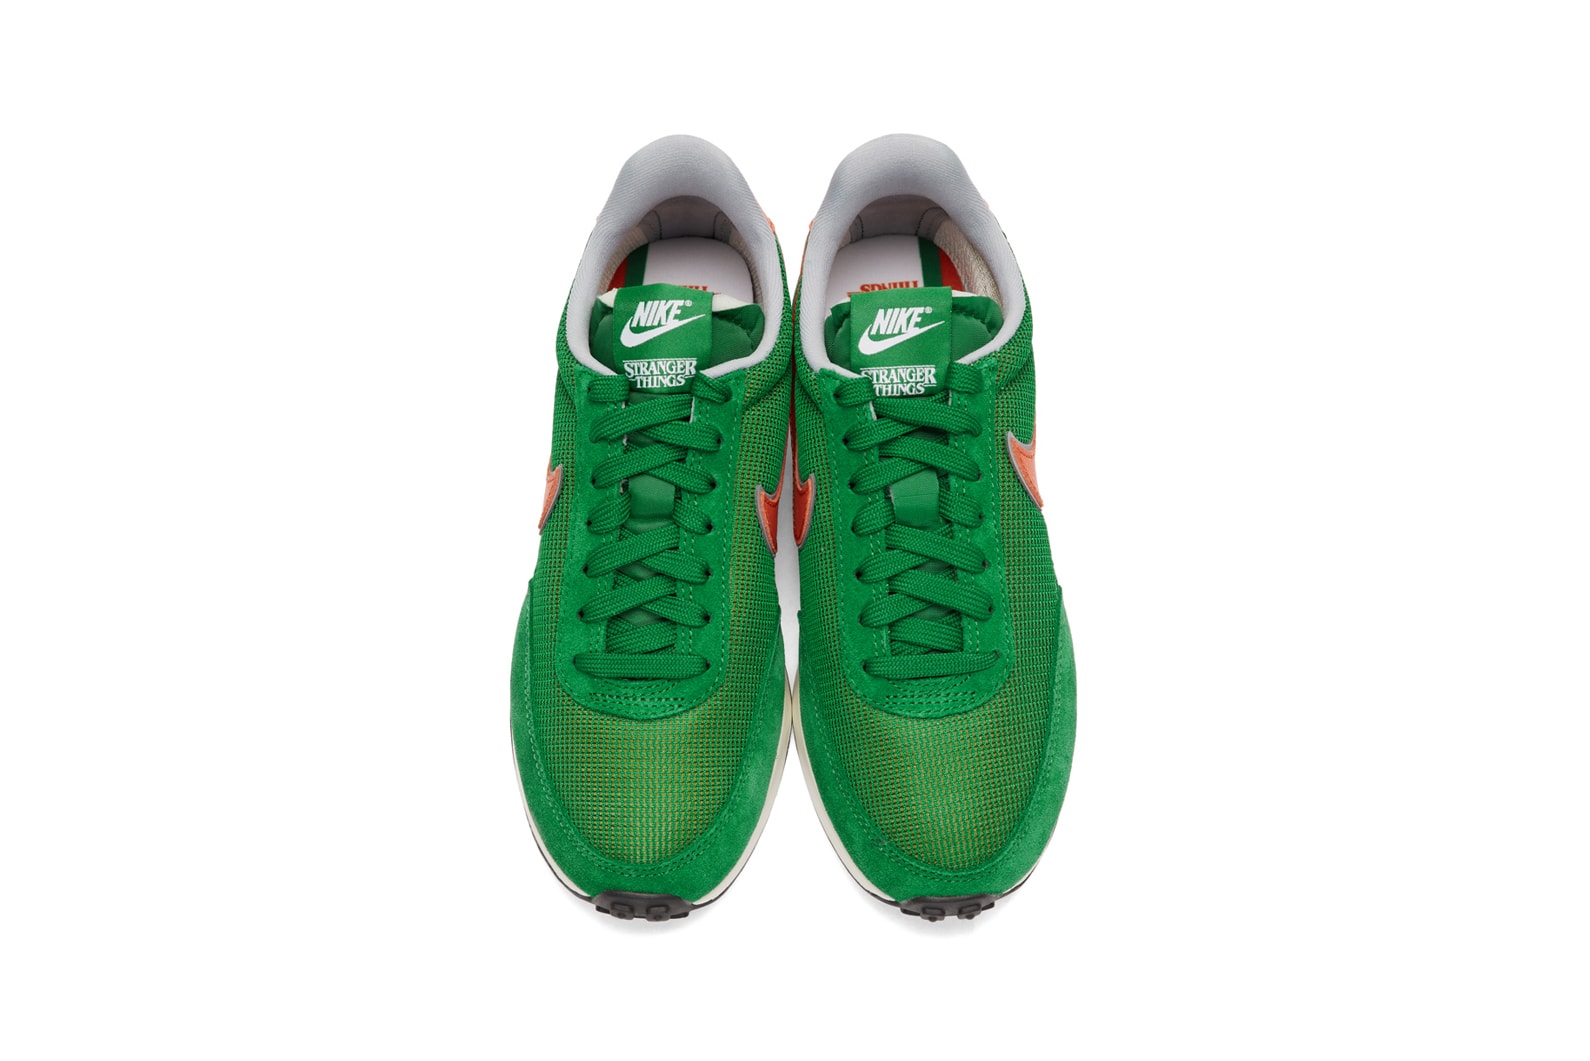 Stranger Things x Nike Air Tailwind Cortez Pine Green White Cosmic Clay